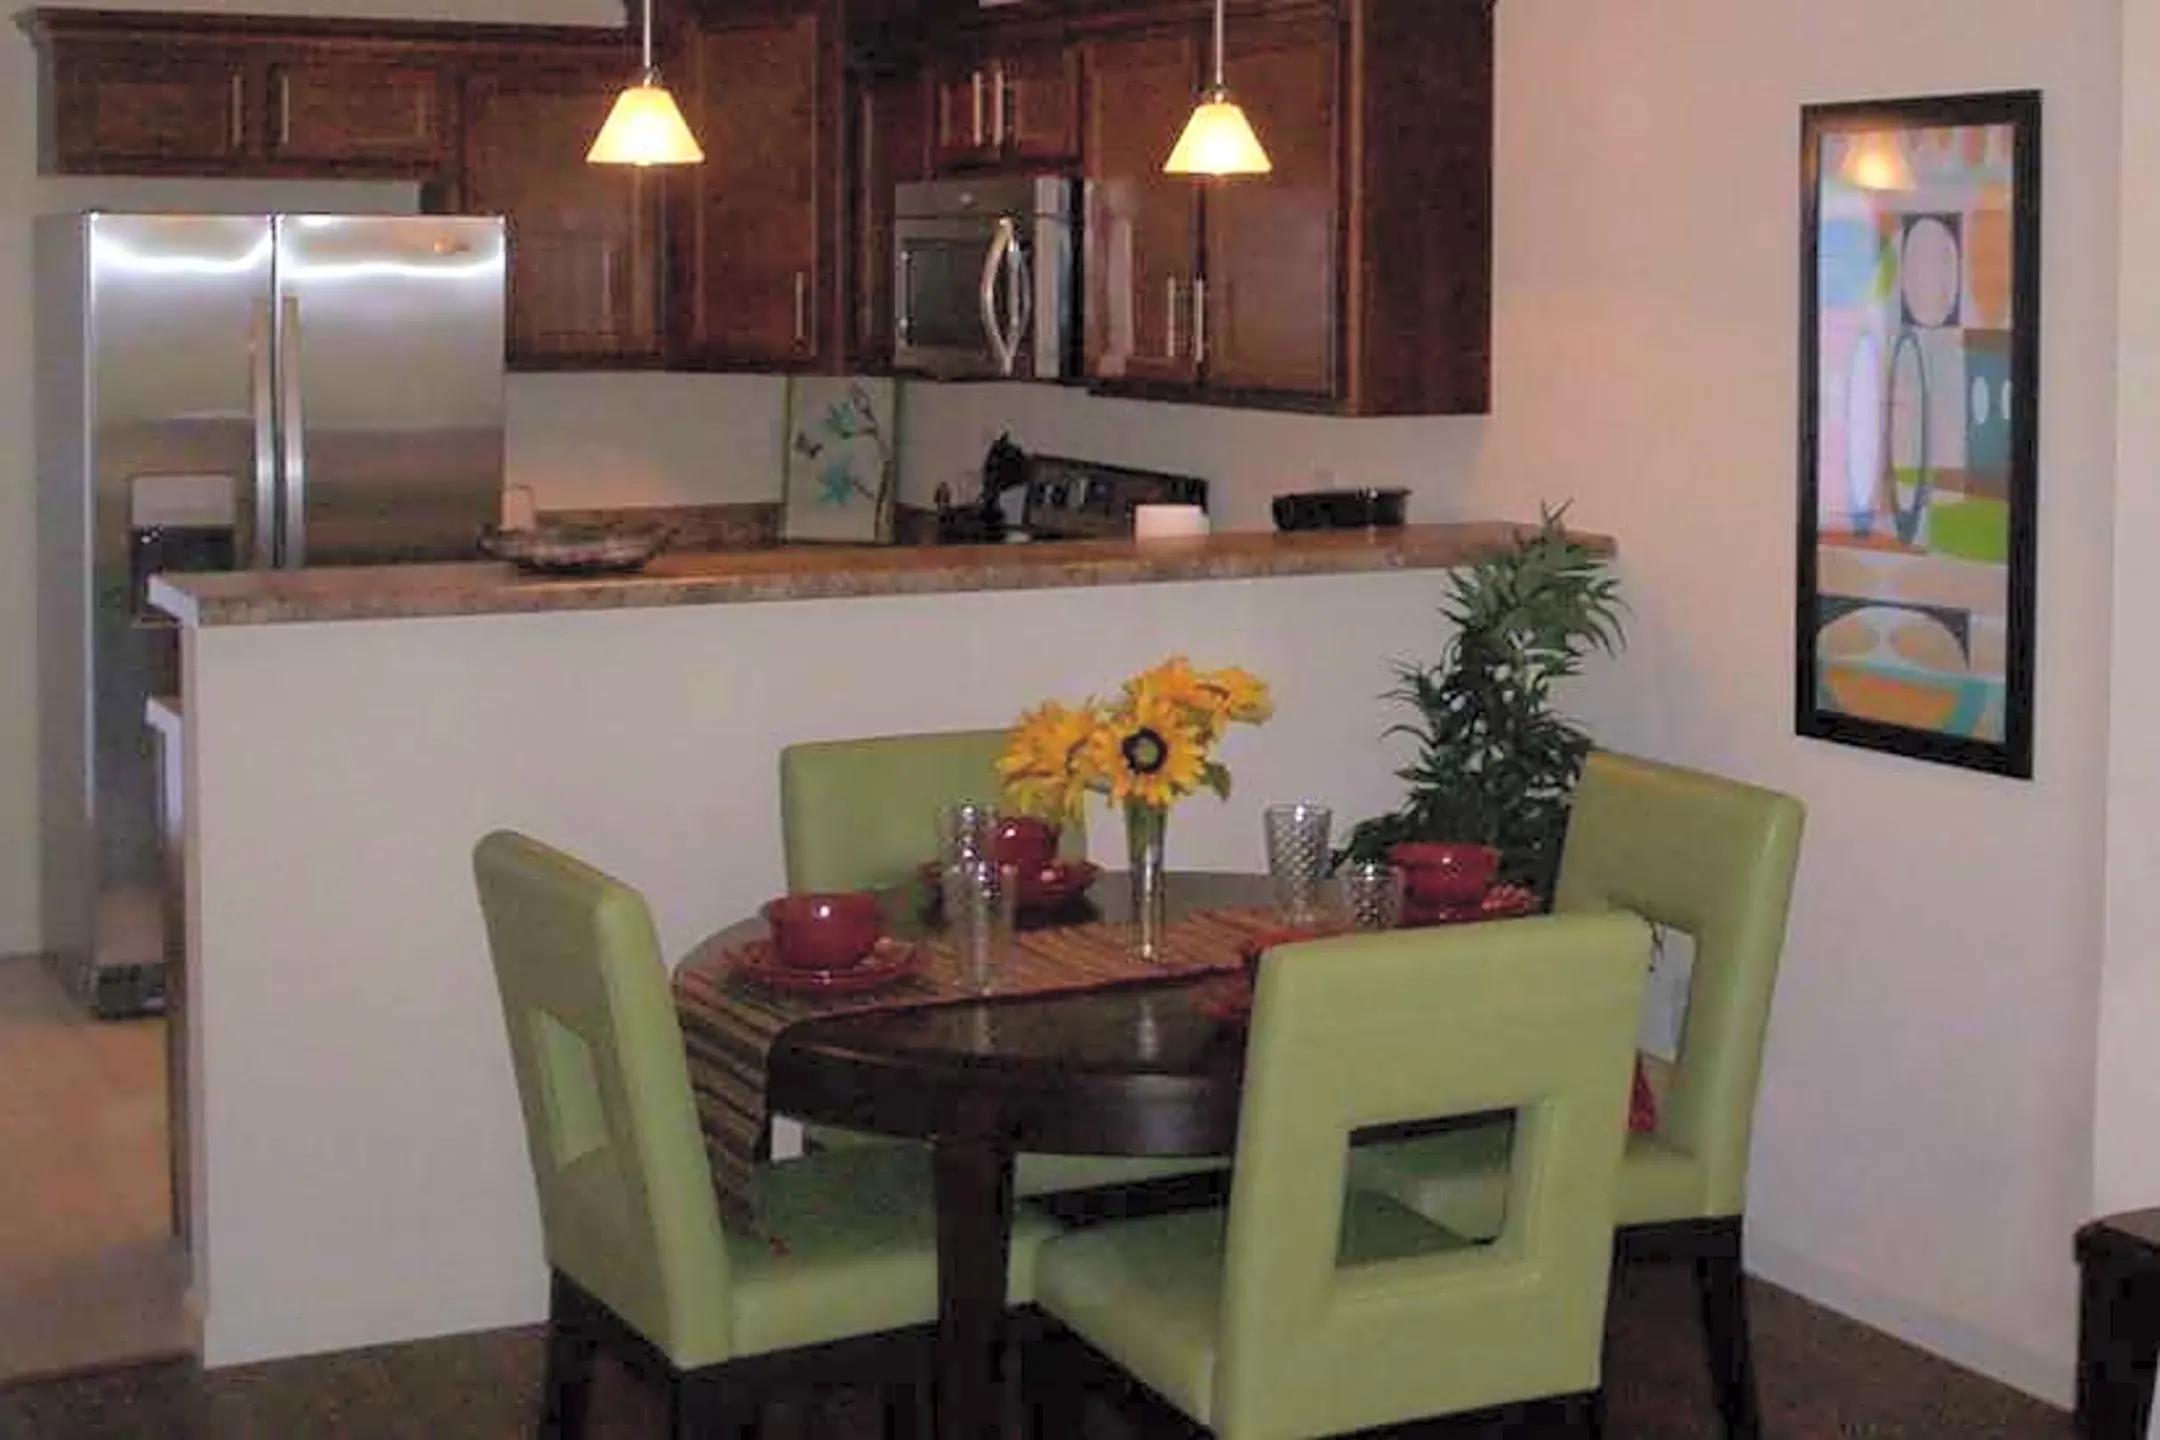 Dining Room - River View Townhomes - Elizabethton, TN